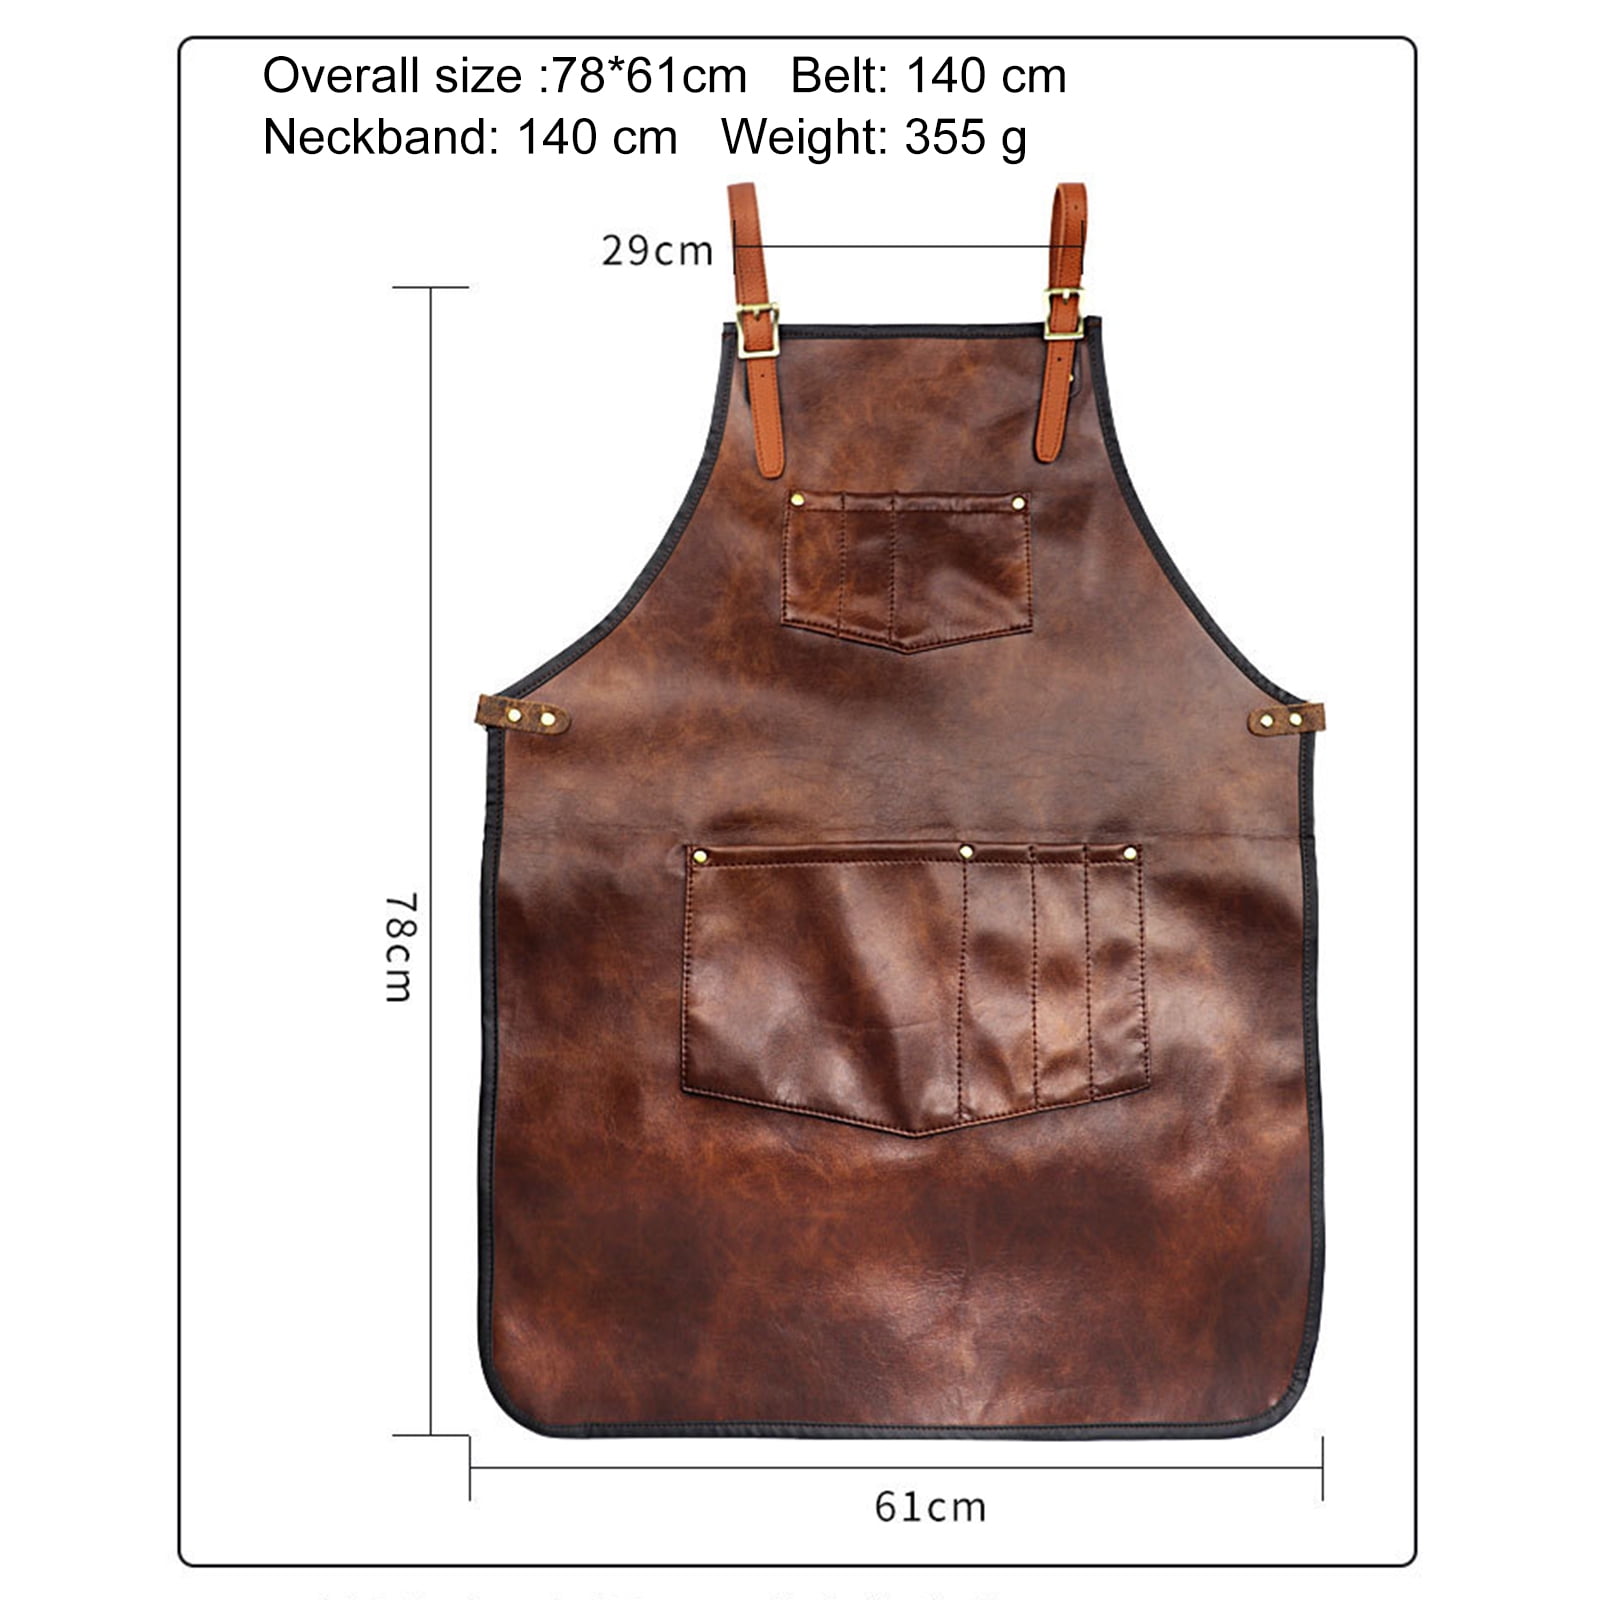 Apron for Men Women Waterproof Leather Apron with Pockets Cross-Back Straps for BBQ Cooking Barber Barista Apron Handworking - Walmart.com